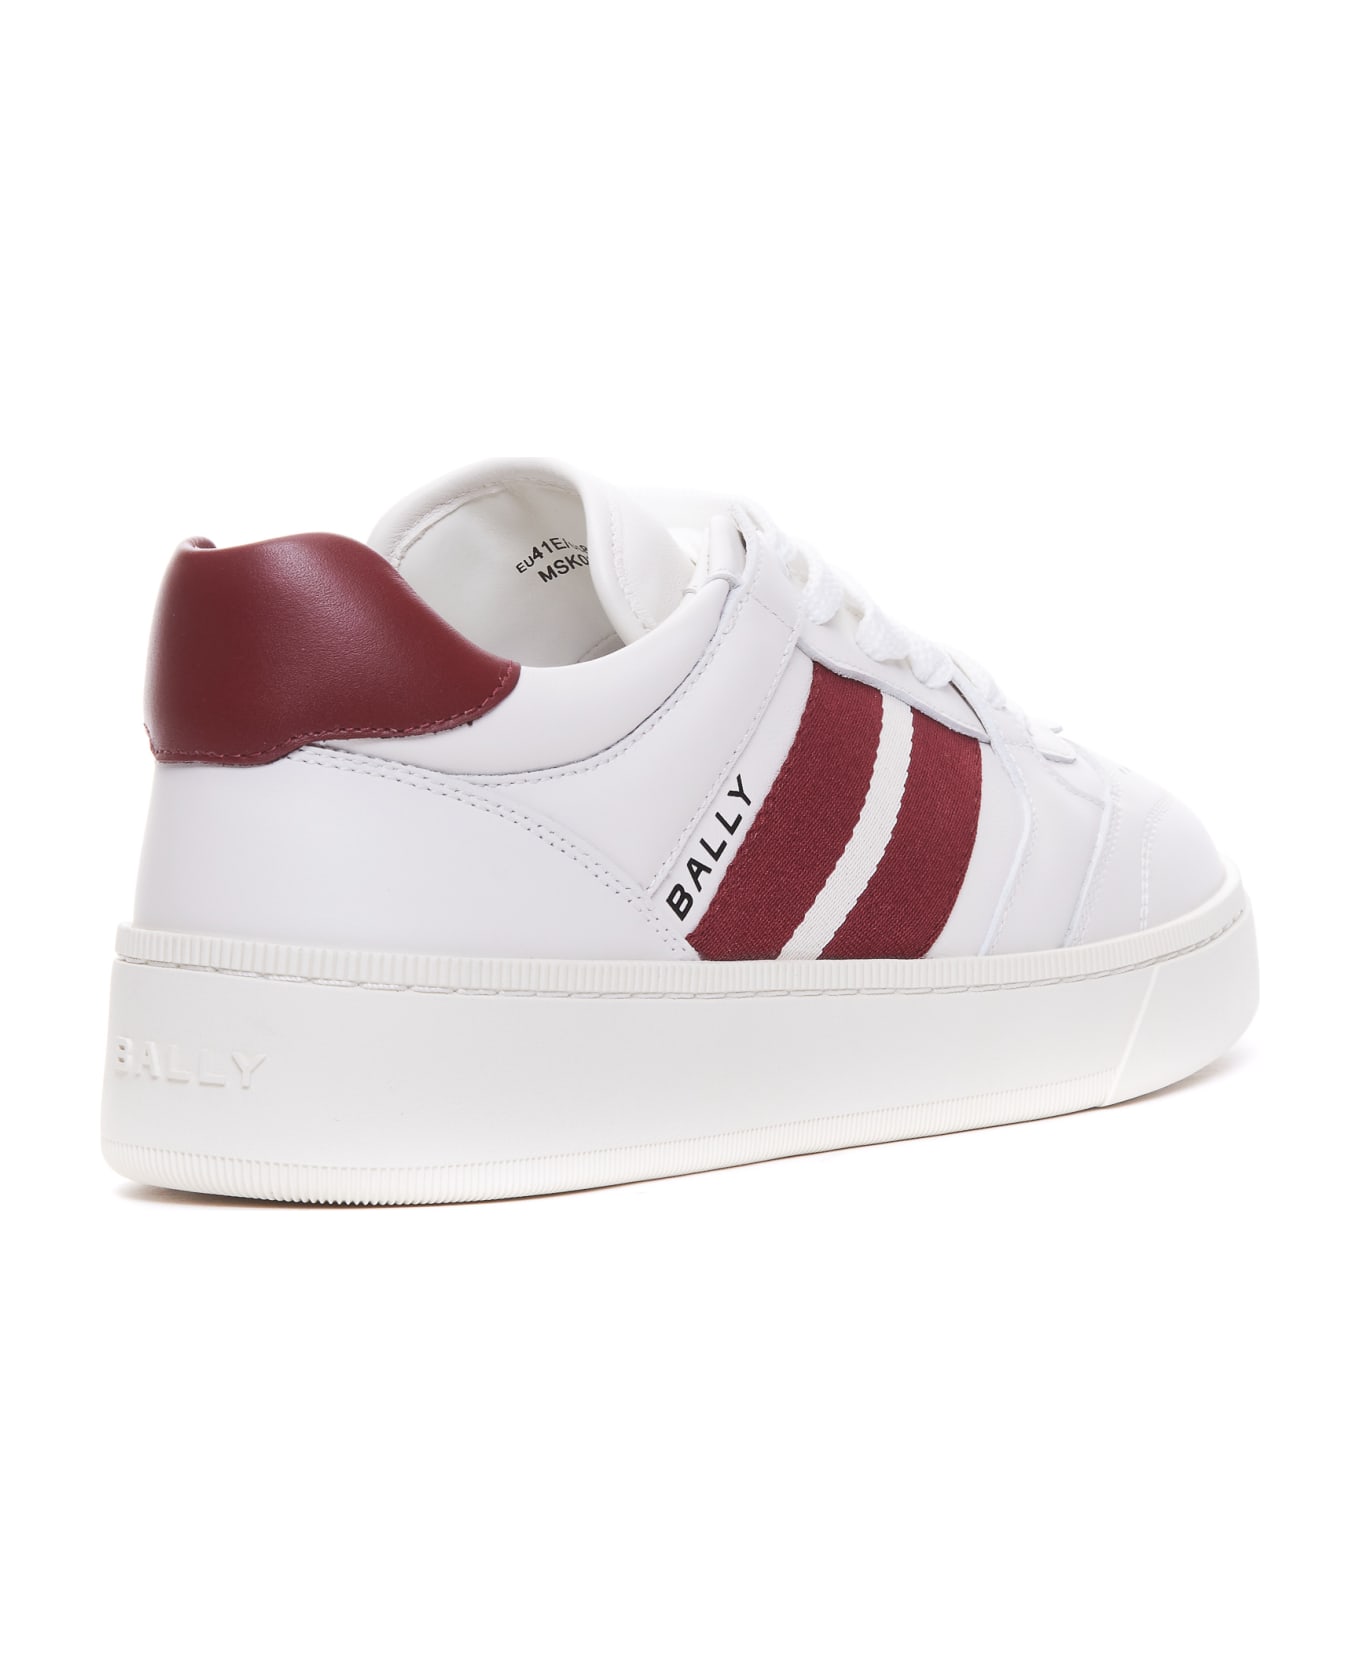 Bally Rebby Sneakers - WHITE/RED